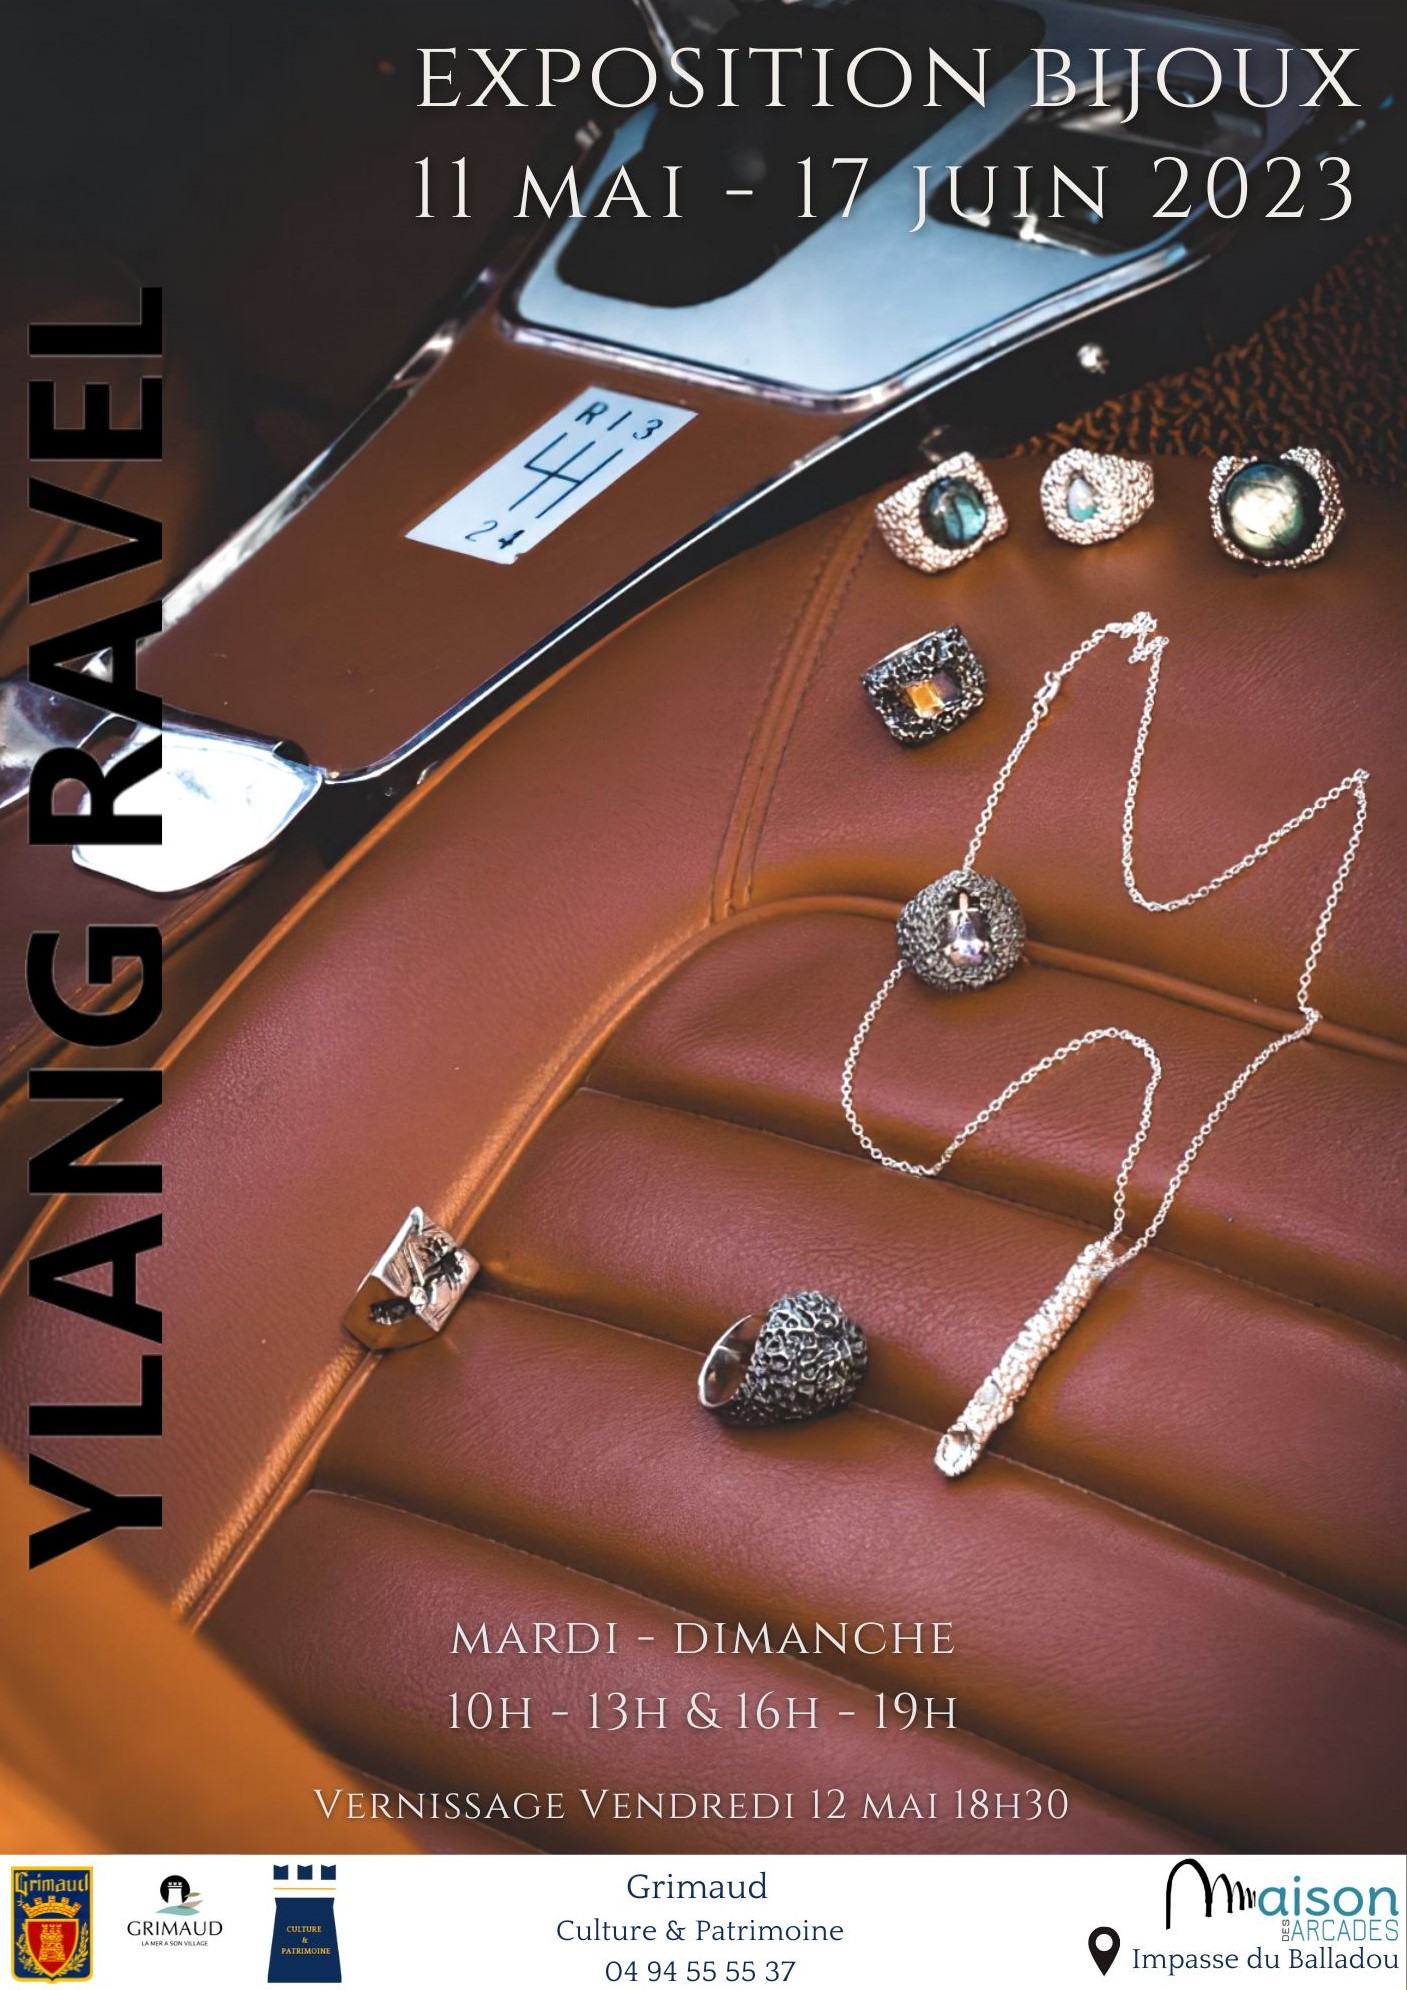 Friday, May 12, 2023 - Vernissage exhibition Jewelery Ylang RAVEL